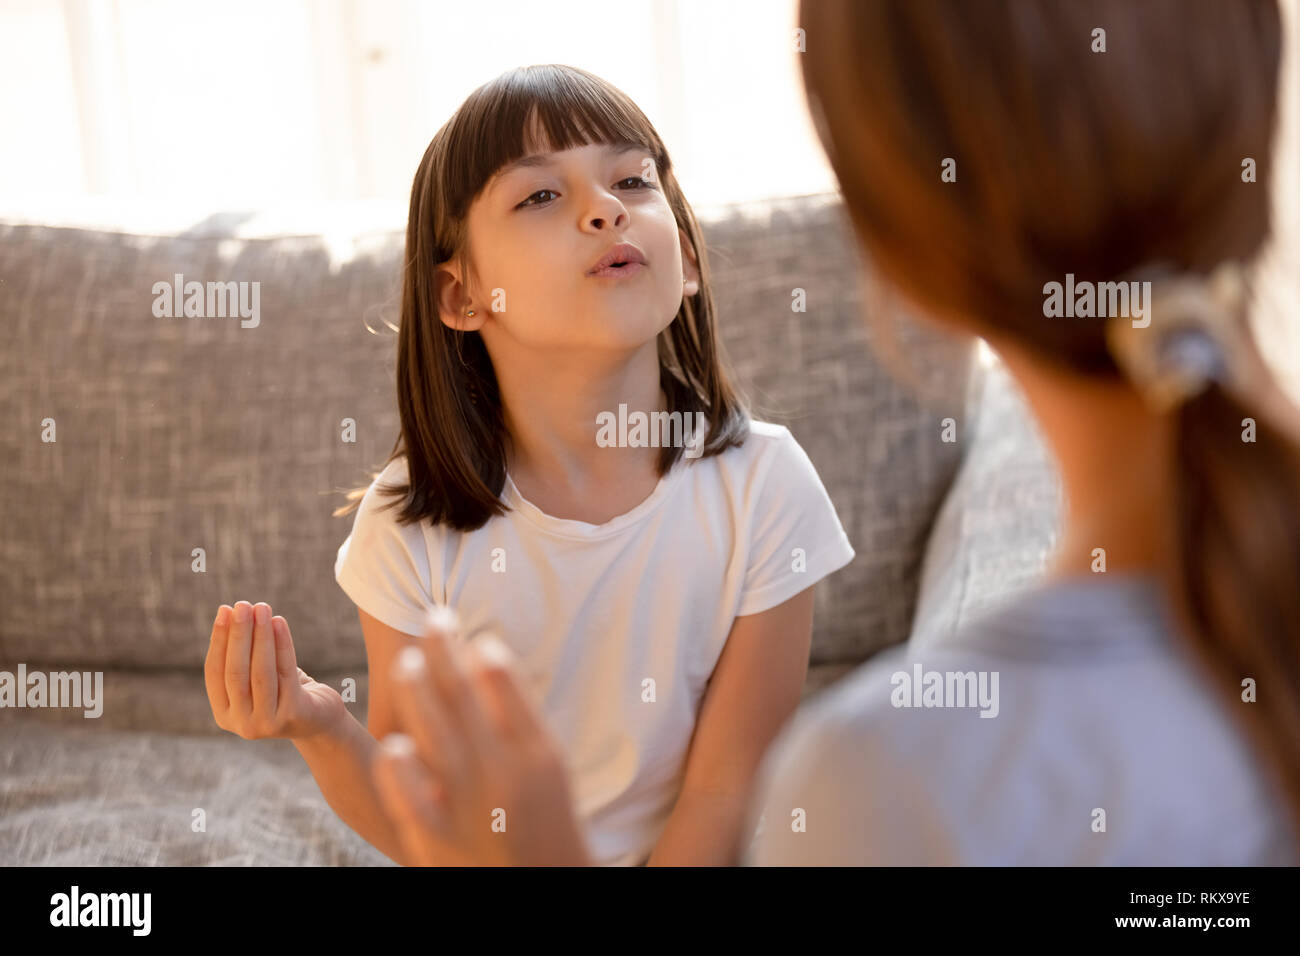 Cute stuttering child girl speaking doing exercises with speech therapist Stock Photo